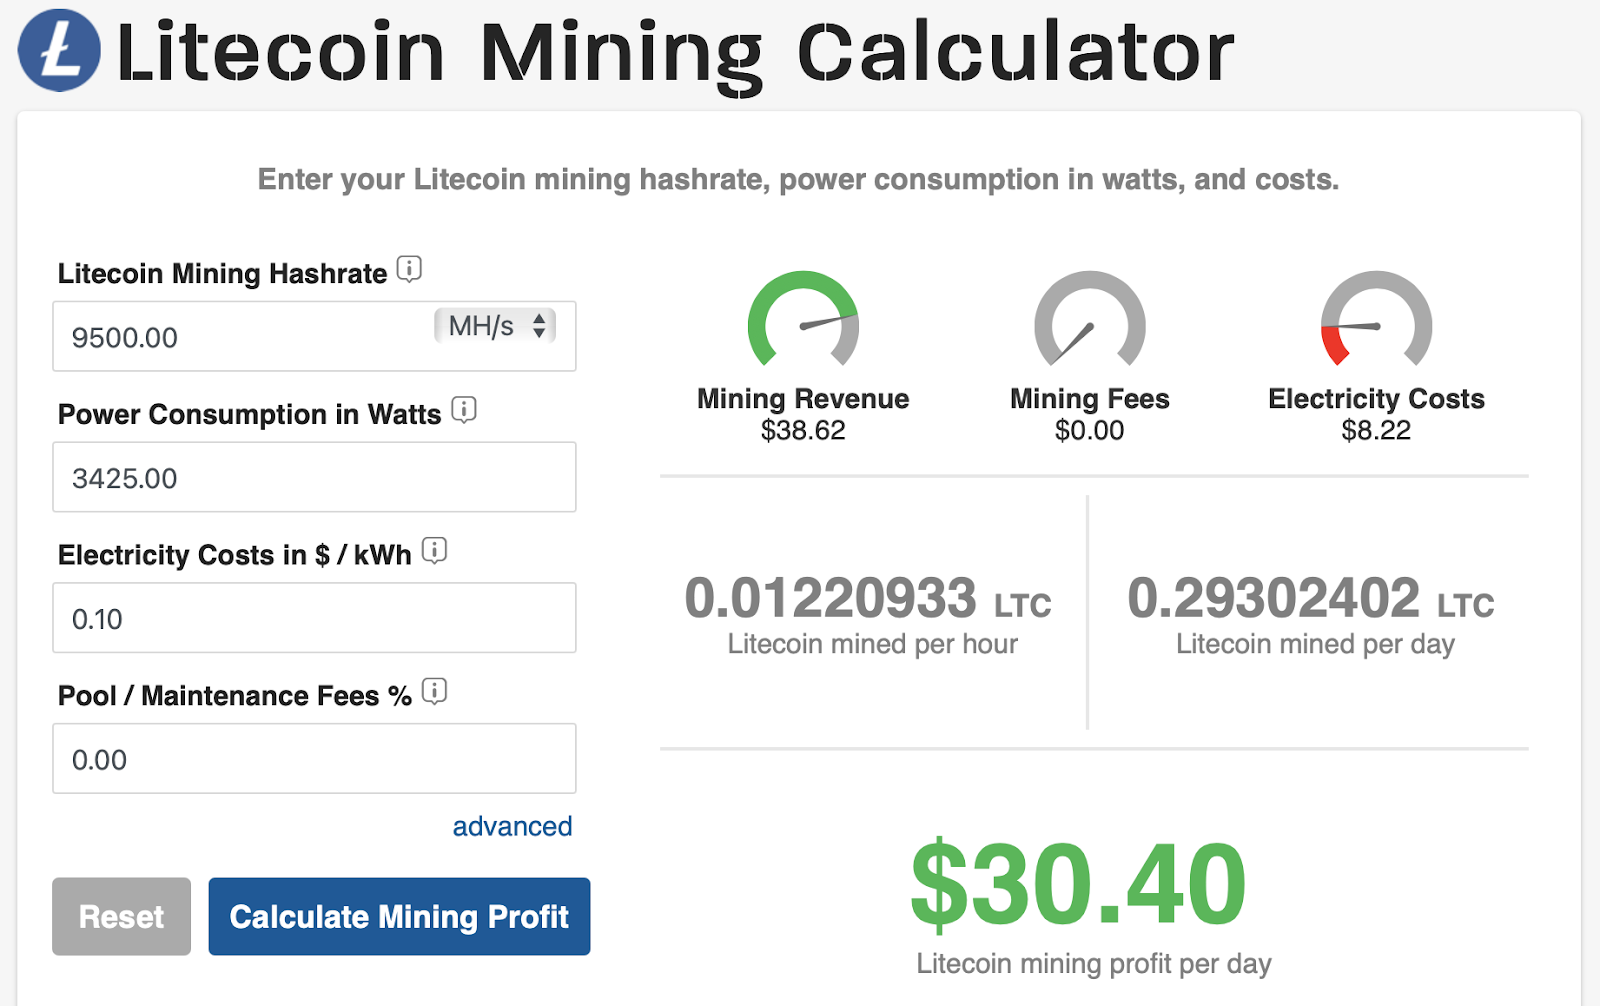 How to Mine Litecoin - A Step by Step Guide to Mining LTC